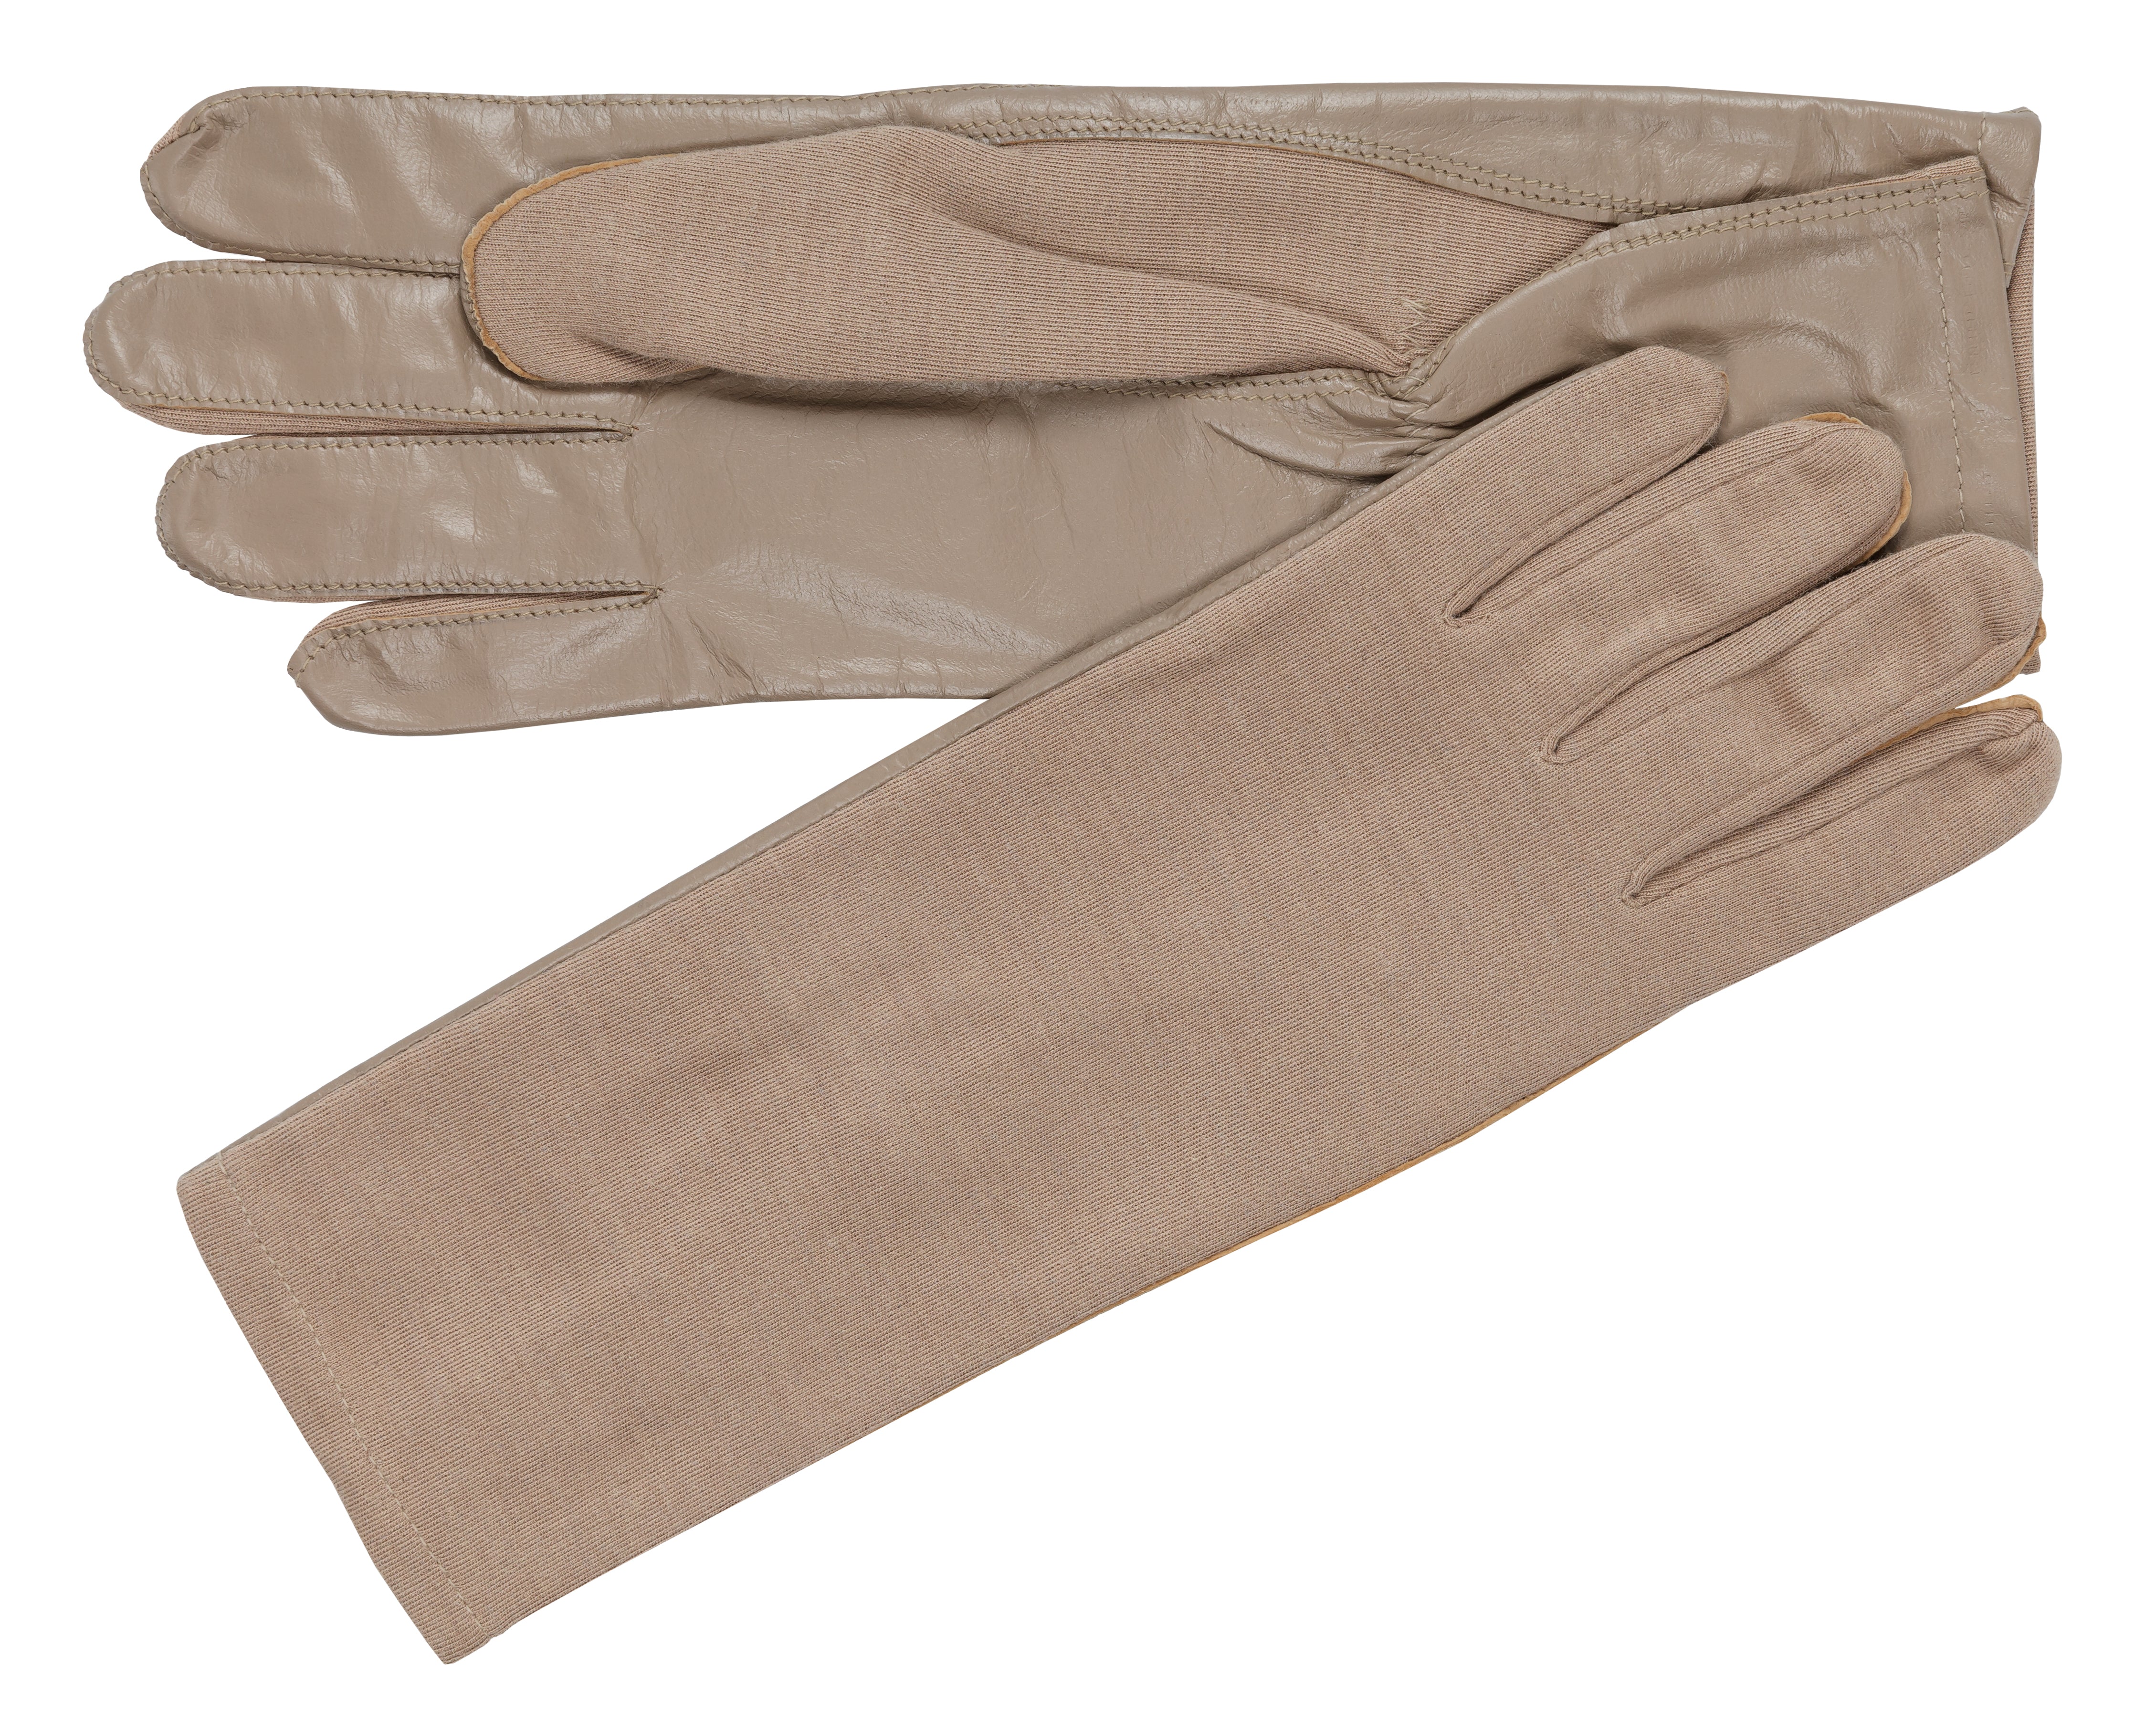 Nomex & Leather Fire Retardant Gloves Pilot,Ninja,Racing,Flying-Touch  screen